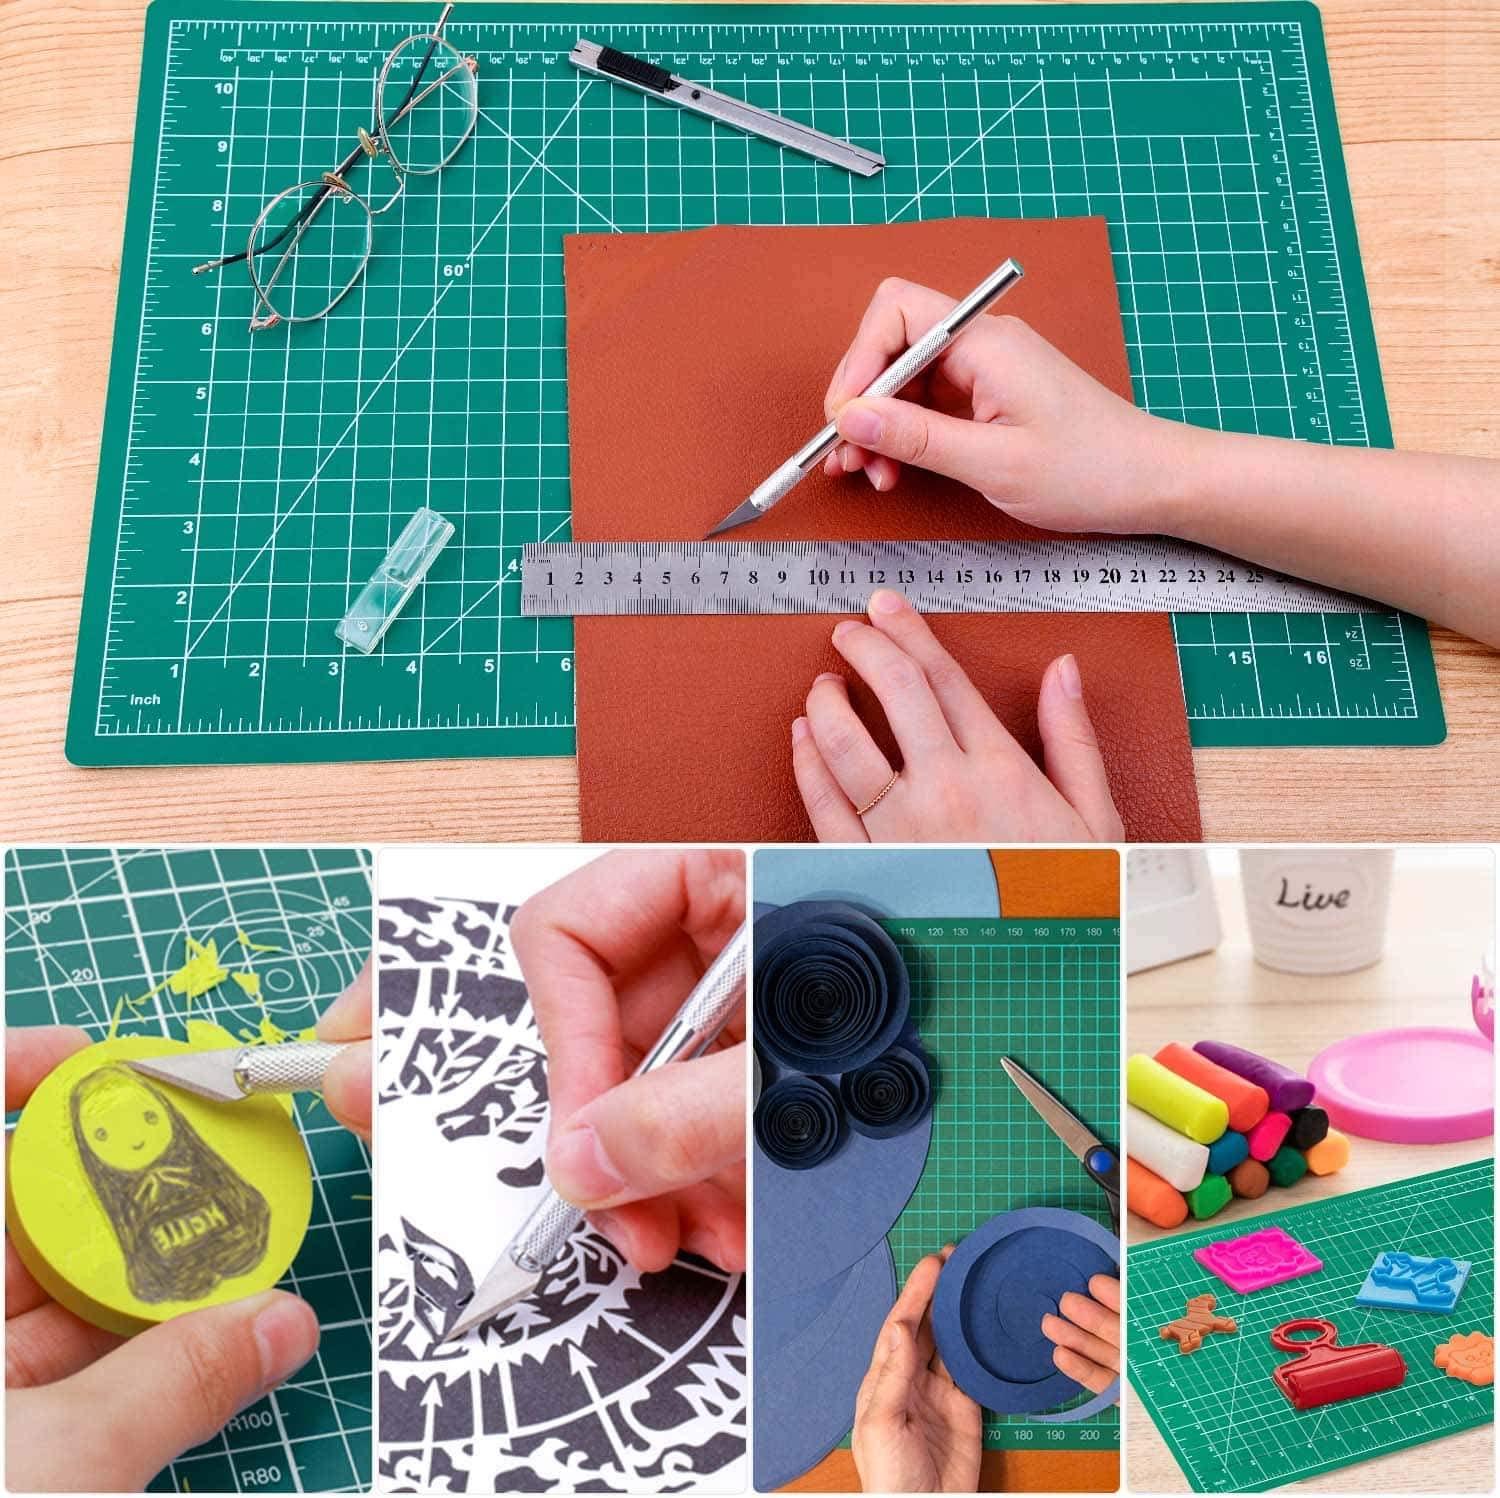 Borang A5 Double-sided DIY Tool Board Cutting Mats for Crafts Gift